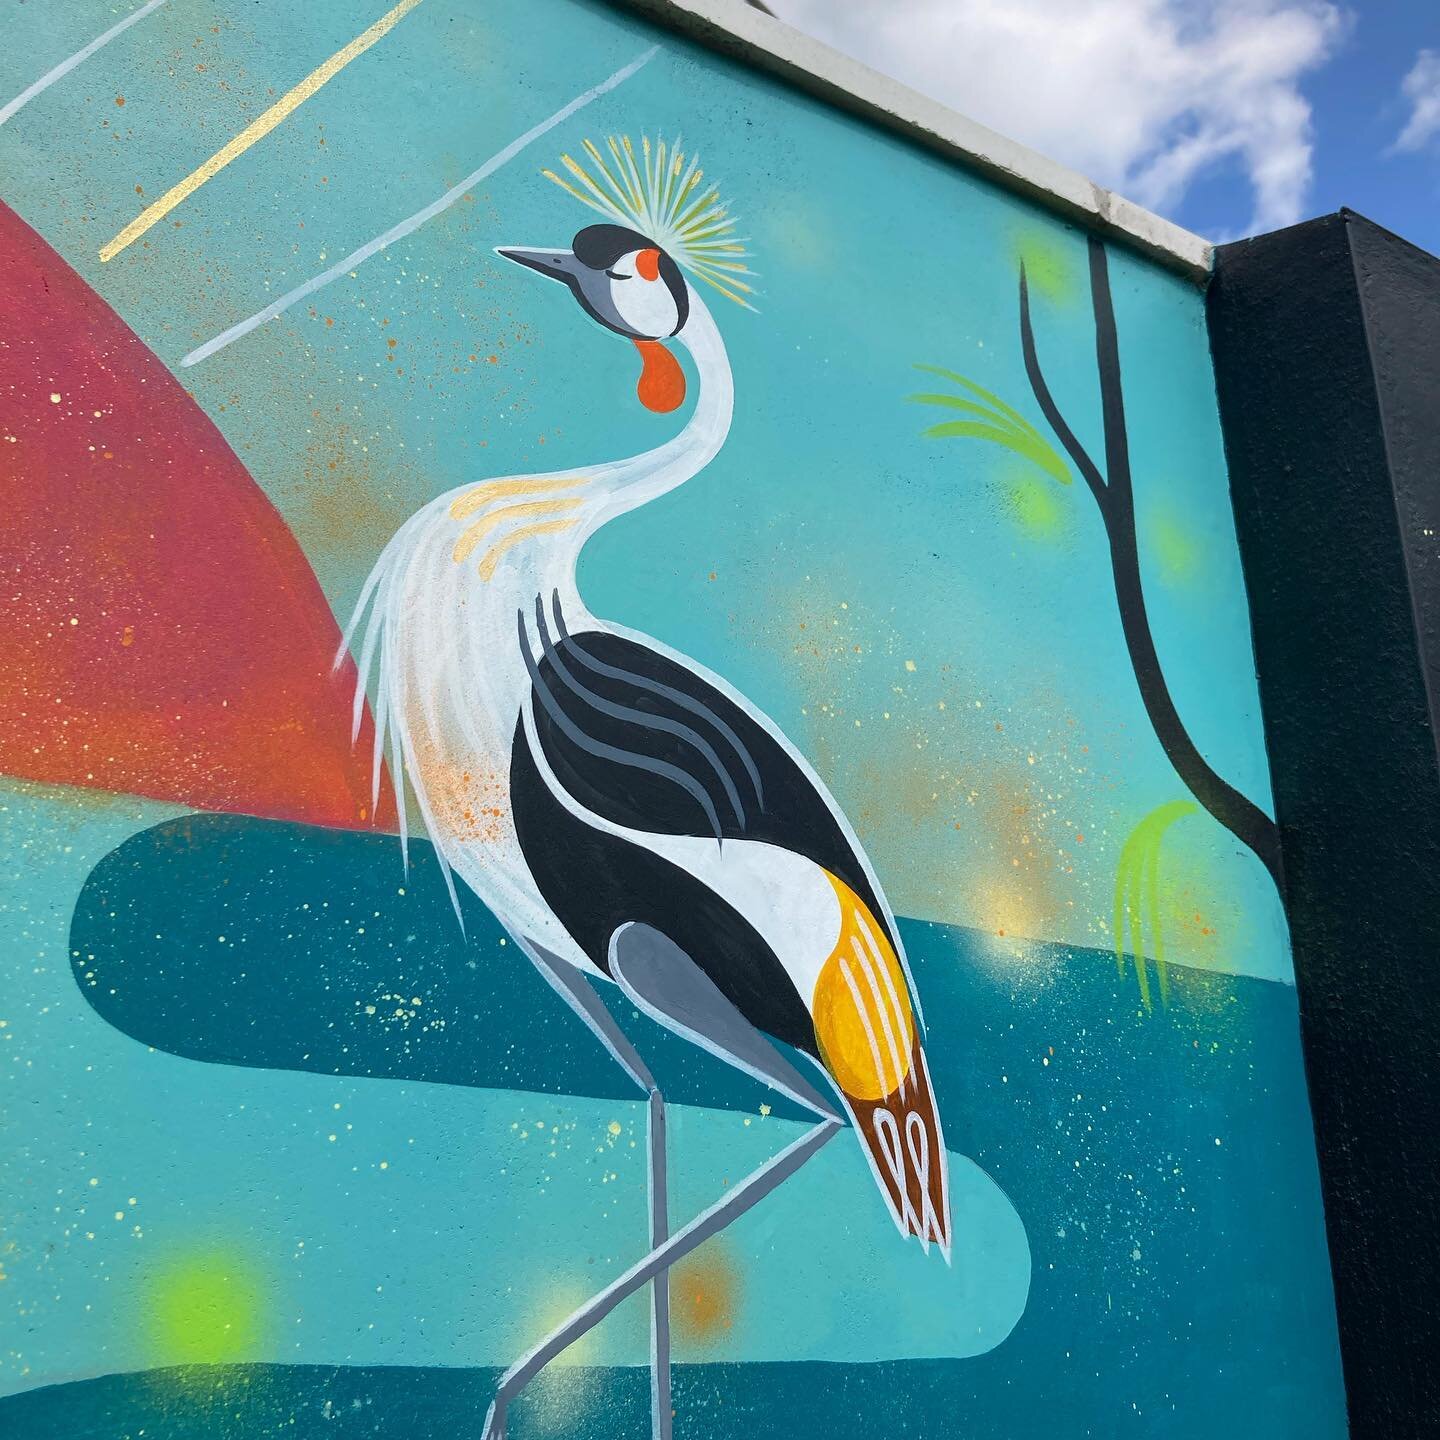 Couple of detail snaps from todays progress. It&rsquo;s nearly there now, just a few little finishing touches tomorrow 🖌️ 

#outdoormural #gardenmural #gardenart #gardenanimals #tropicalgarden #femalemuralist #paintingoutdoors #outdoorart #commercia